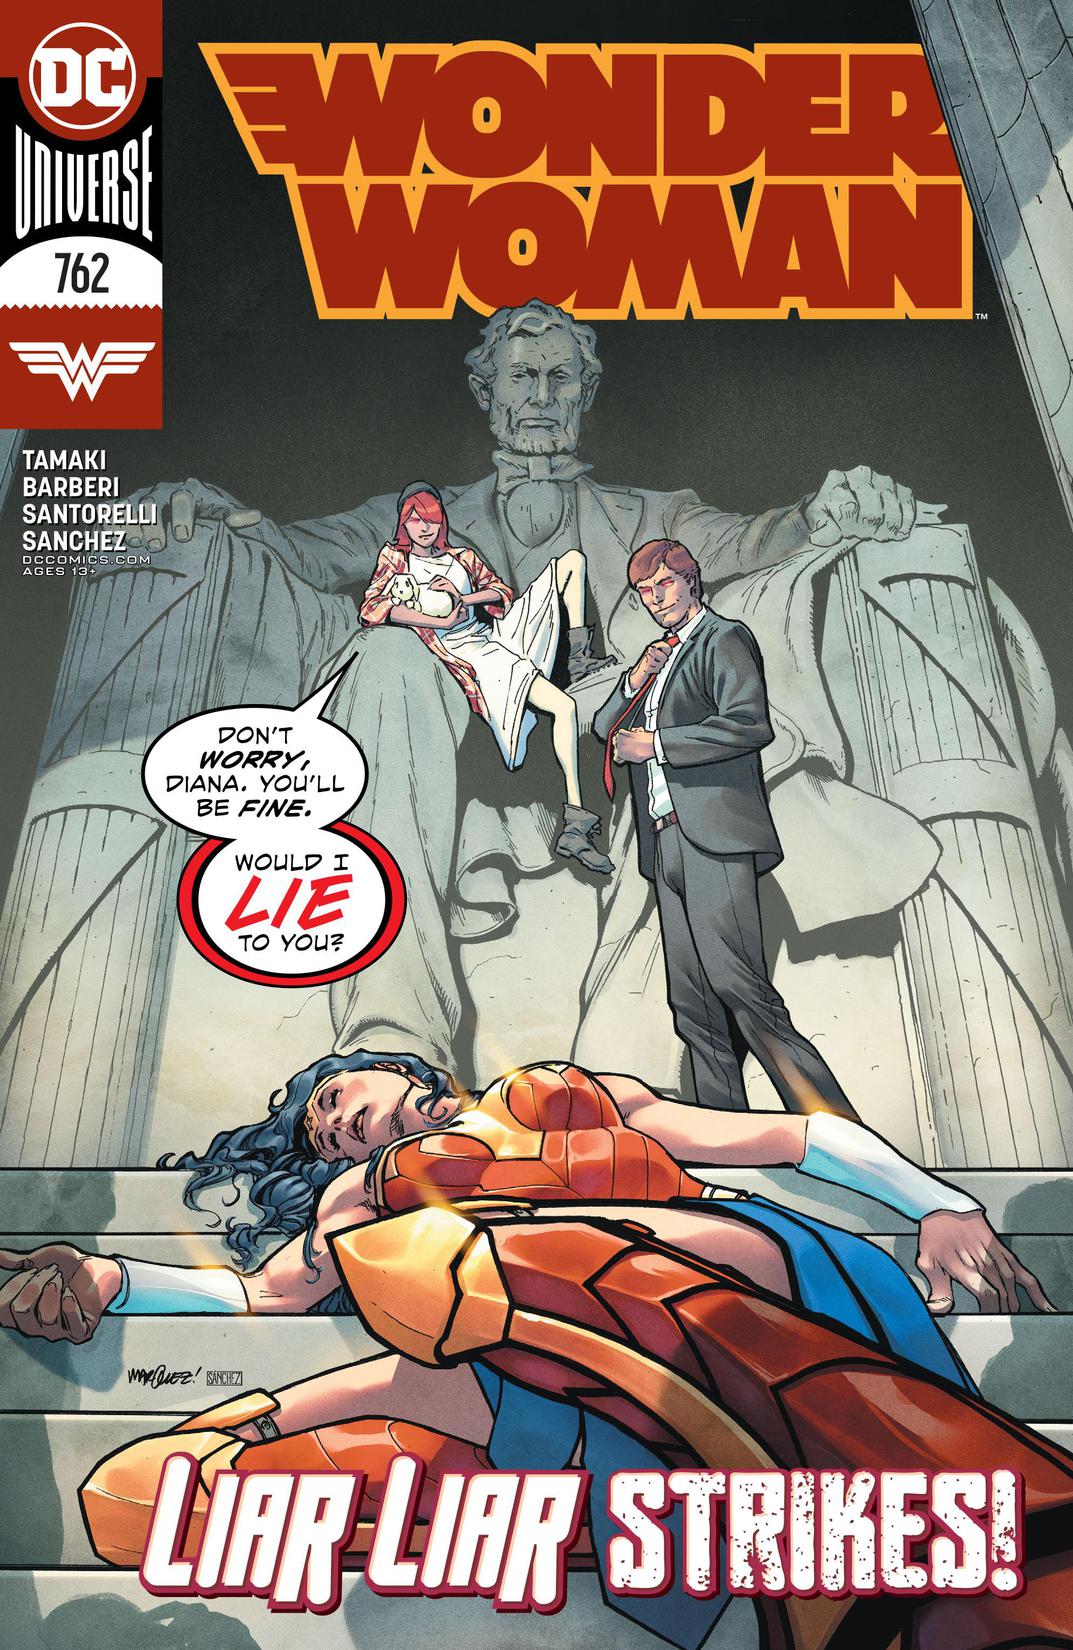 Wonder Woman (2016-) #762 preview images